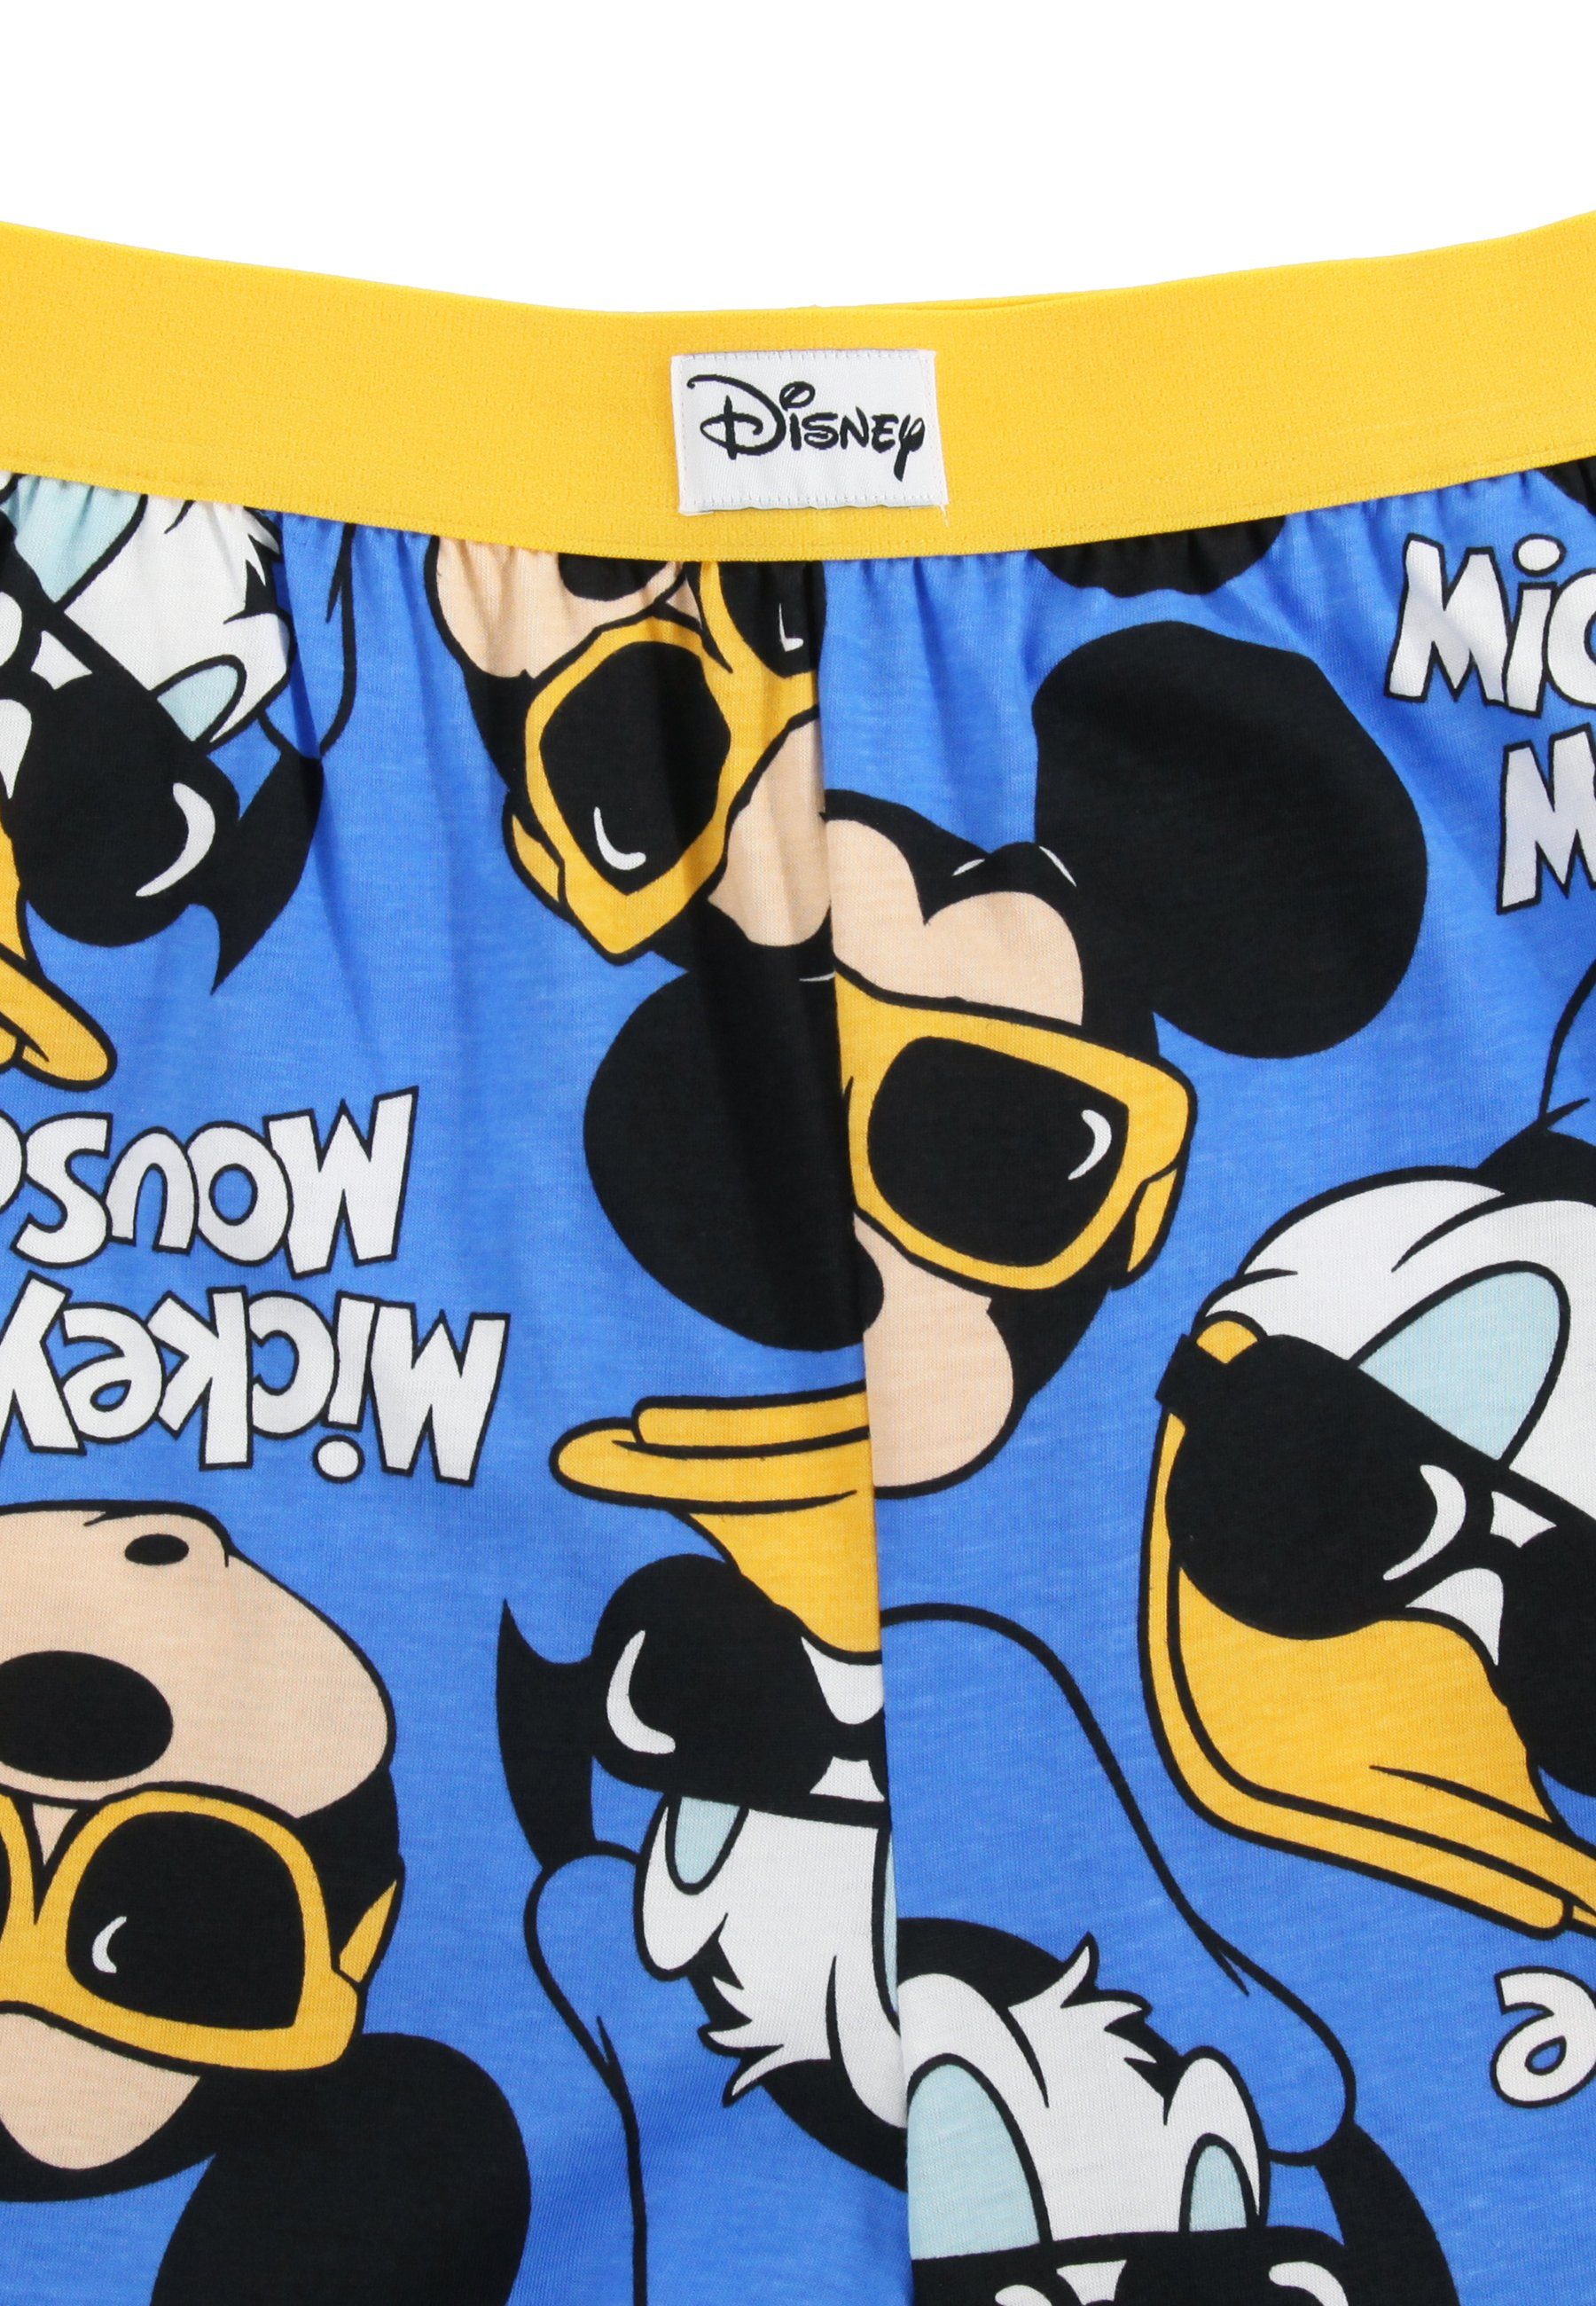 Loungepants - Loungepant Recovered Mickey Donald Sunglasses and Disney Blue